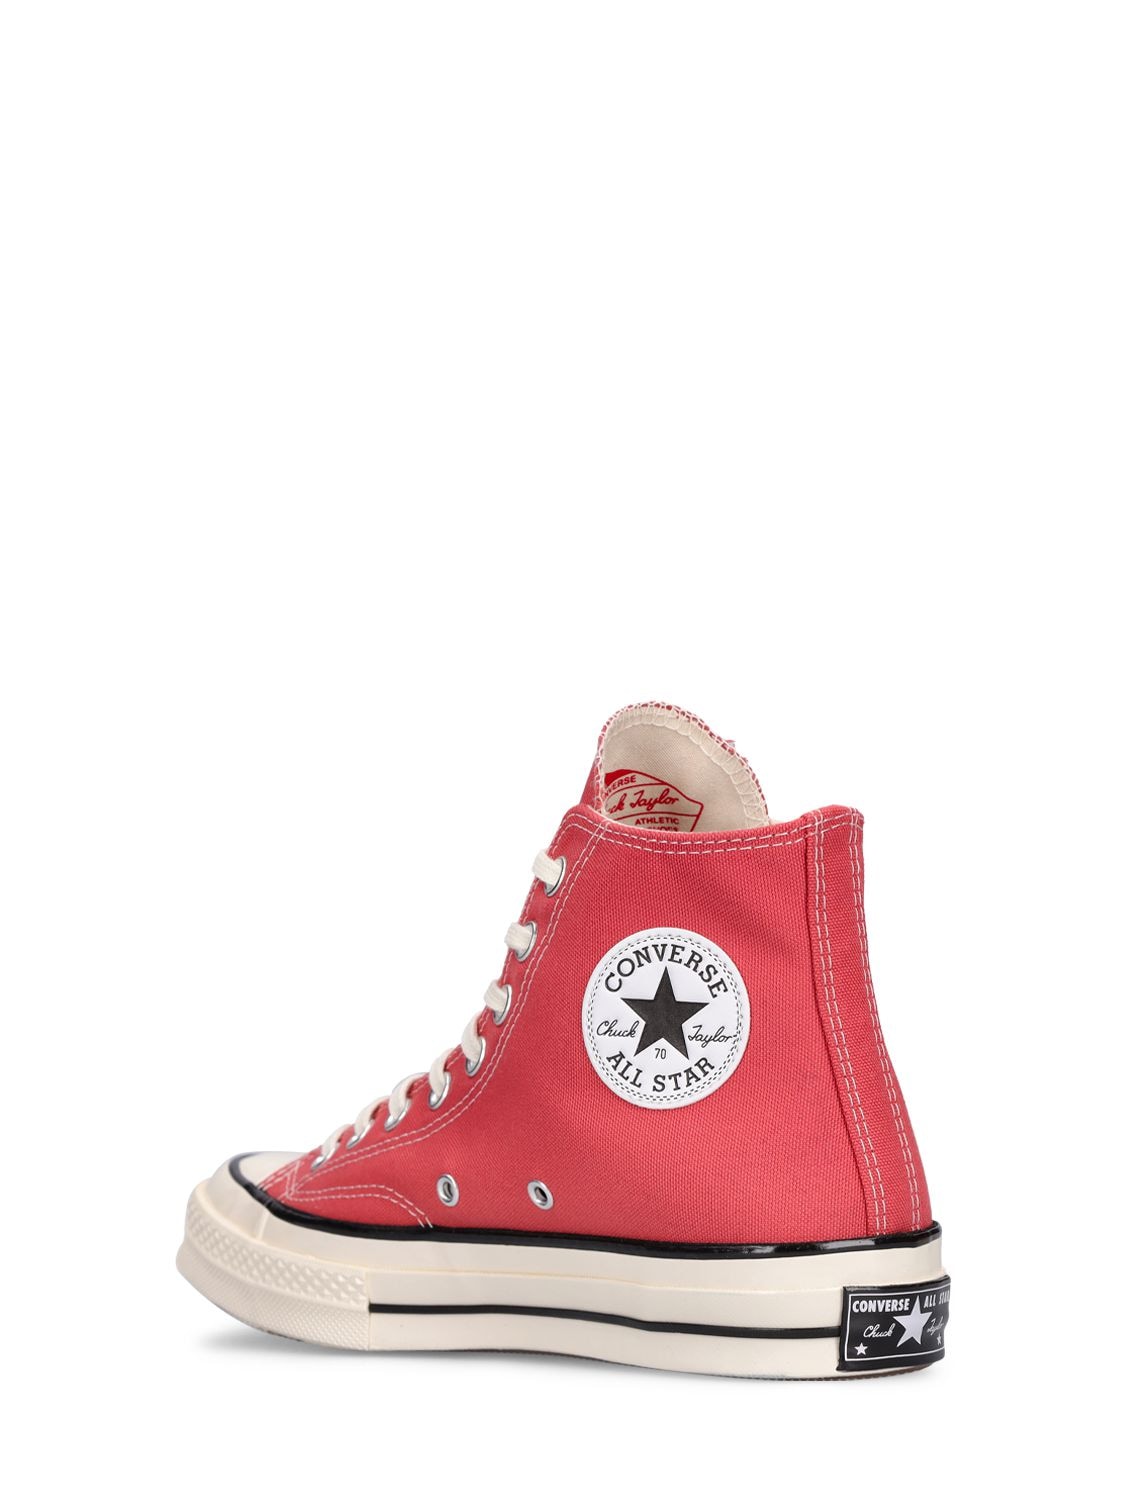 Converse High Tops Shoes Online - Chuck 70 Love Thread Mens Red